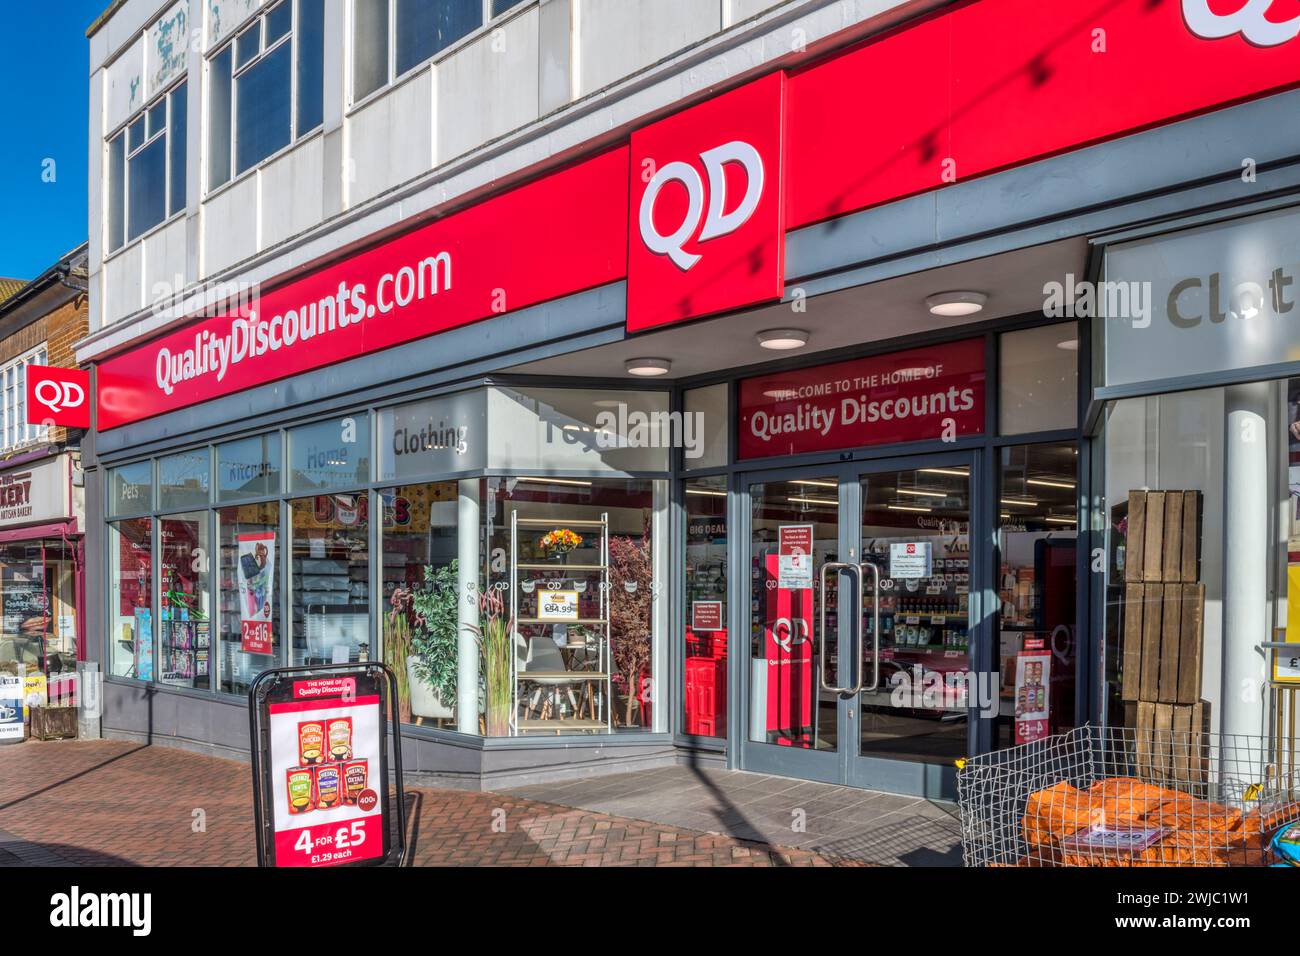 A branch of QD Stores or Quality Discounts in Hunstanton, Norfolk. Stock Photo